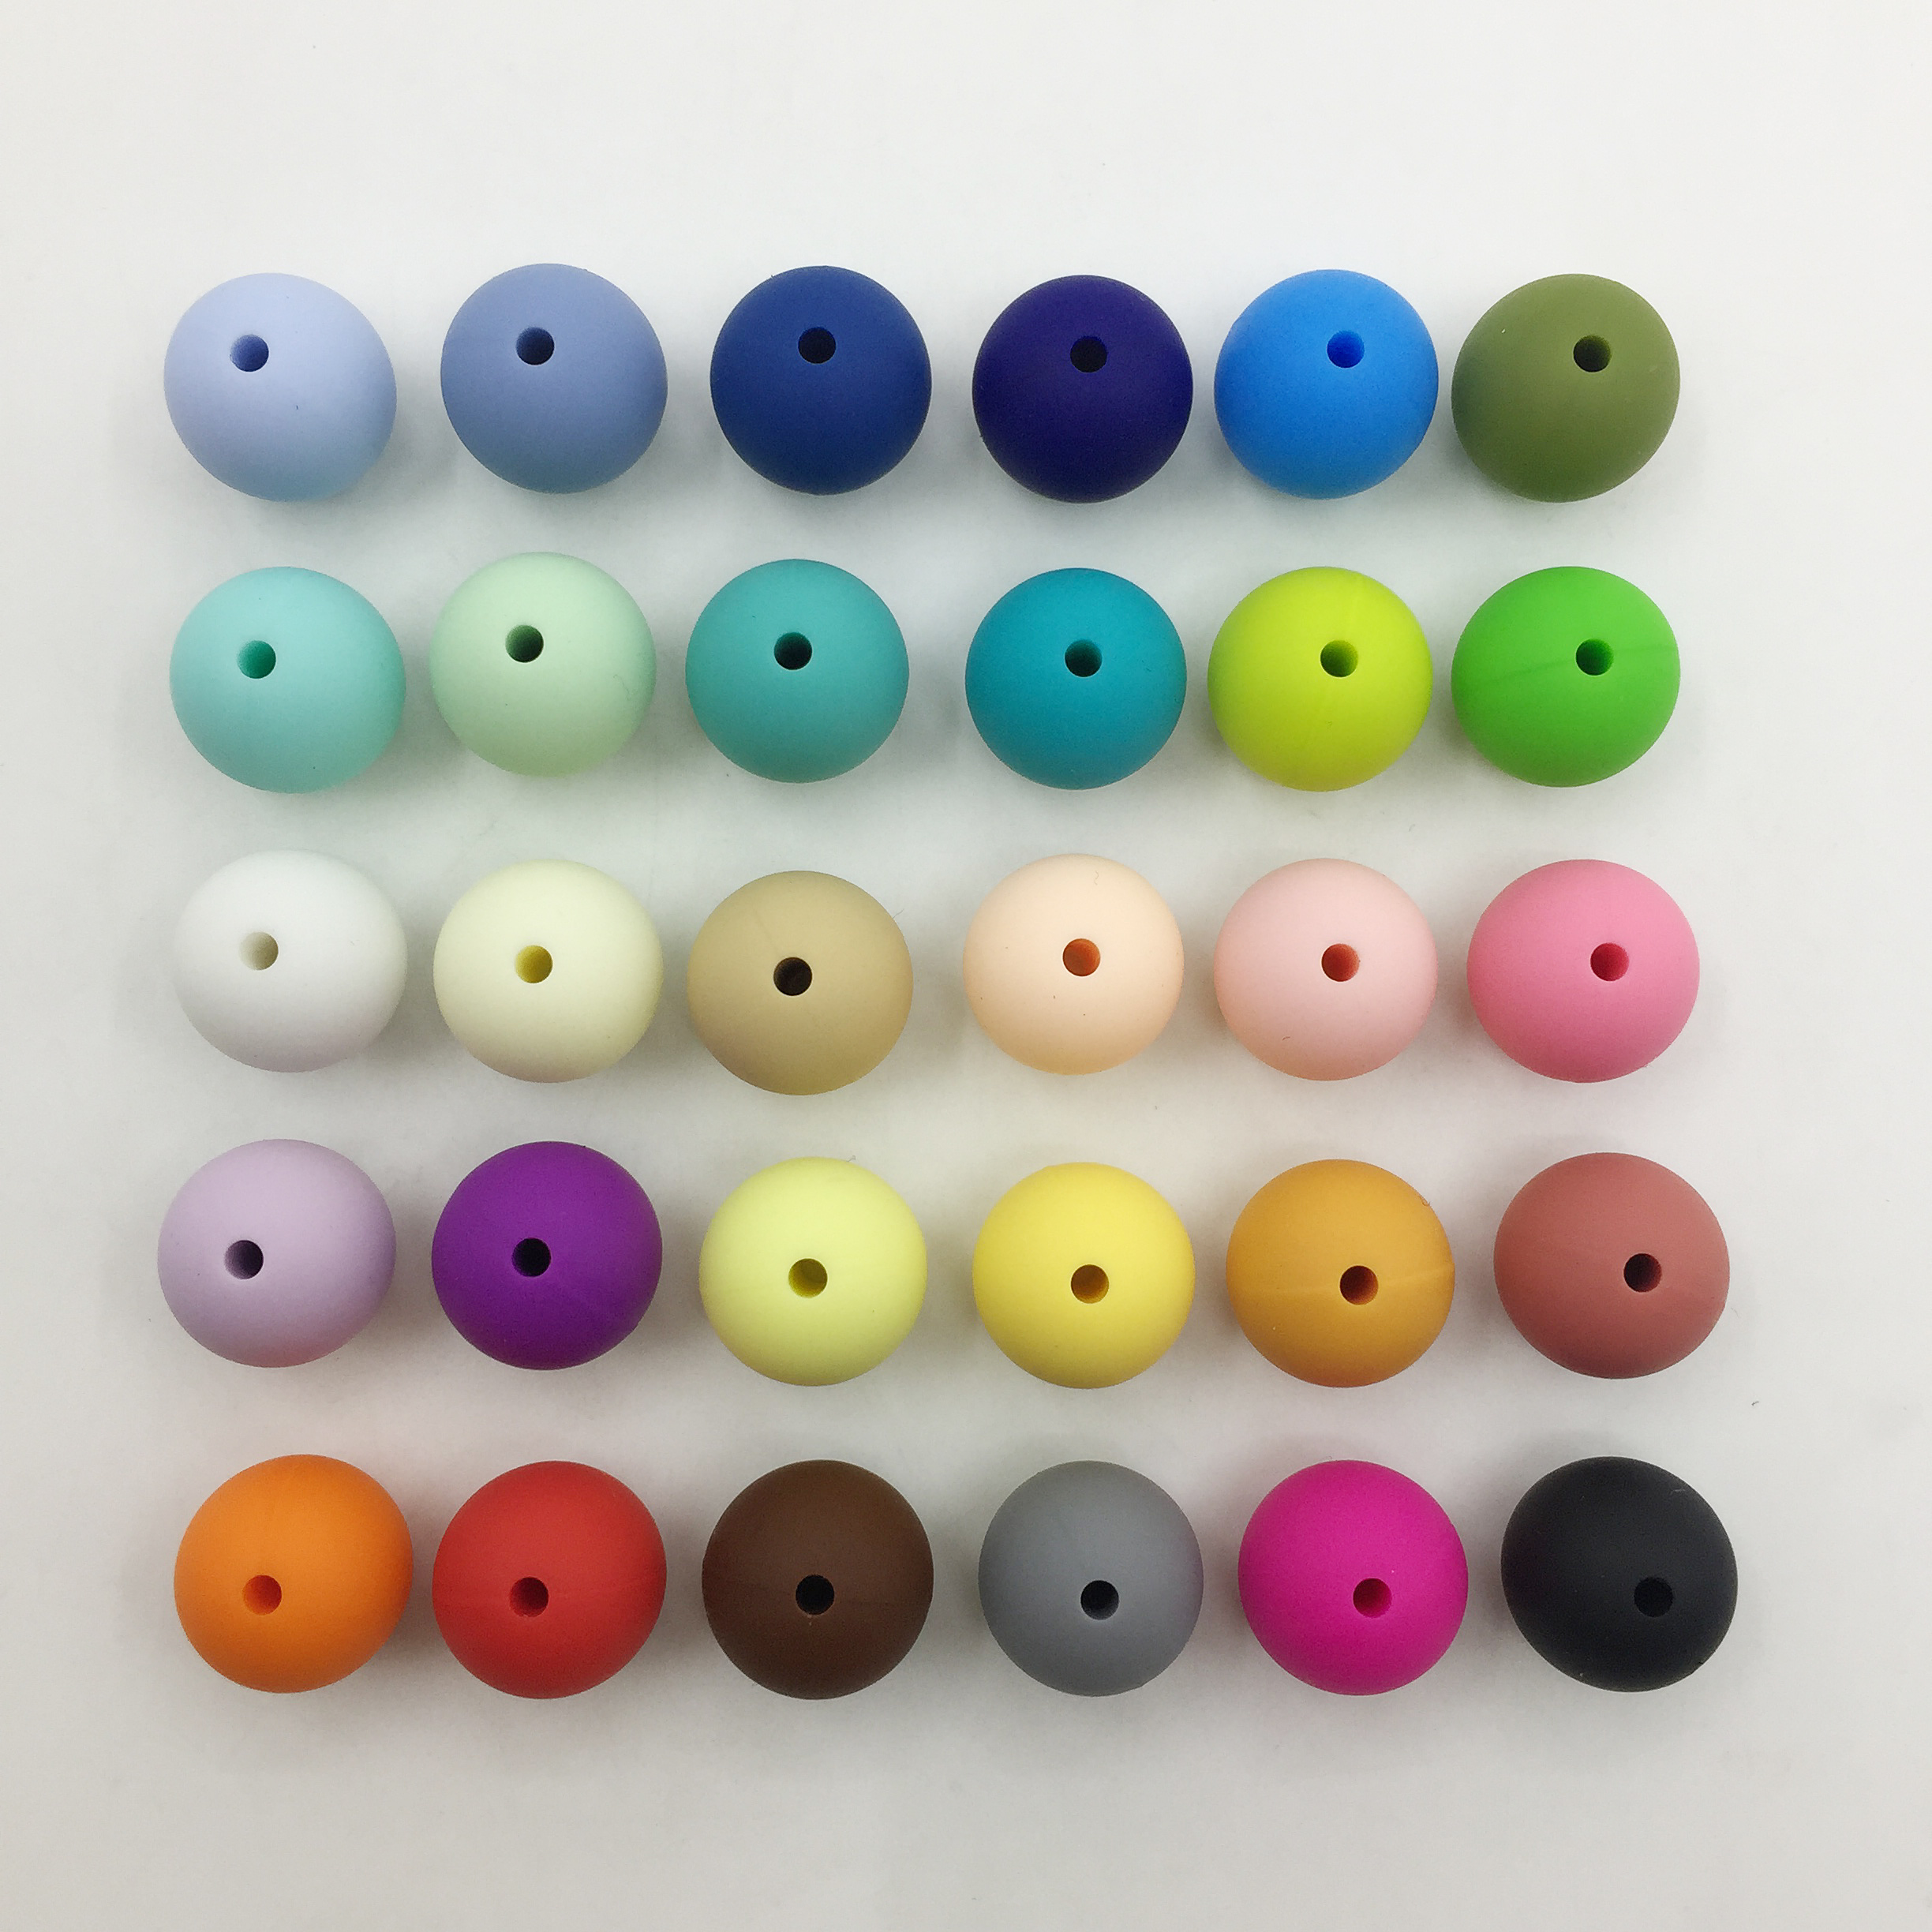 15mm Silicone Beads Silicone bead 100pcs/lot Food Grade Teething Nursing Chewing Round beads Loose Silicone Beads от DHgate WW